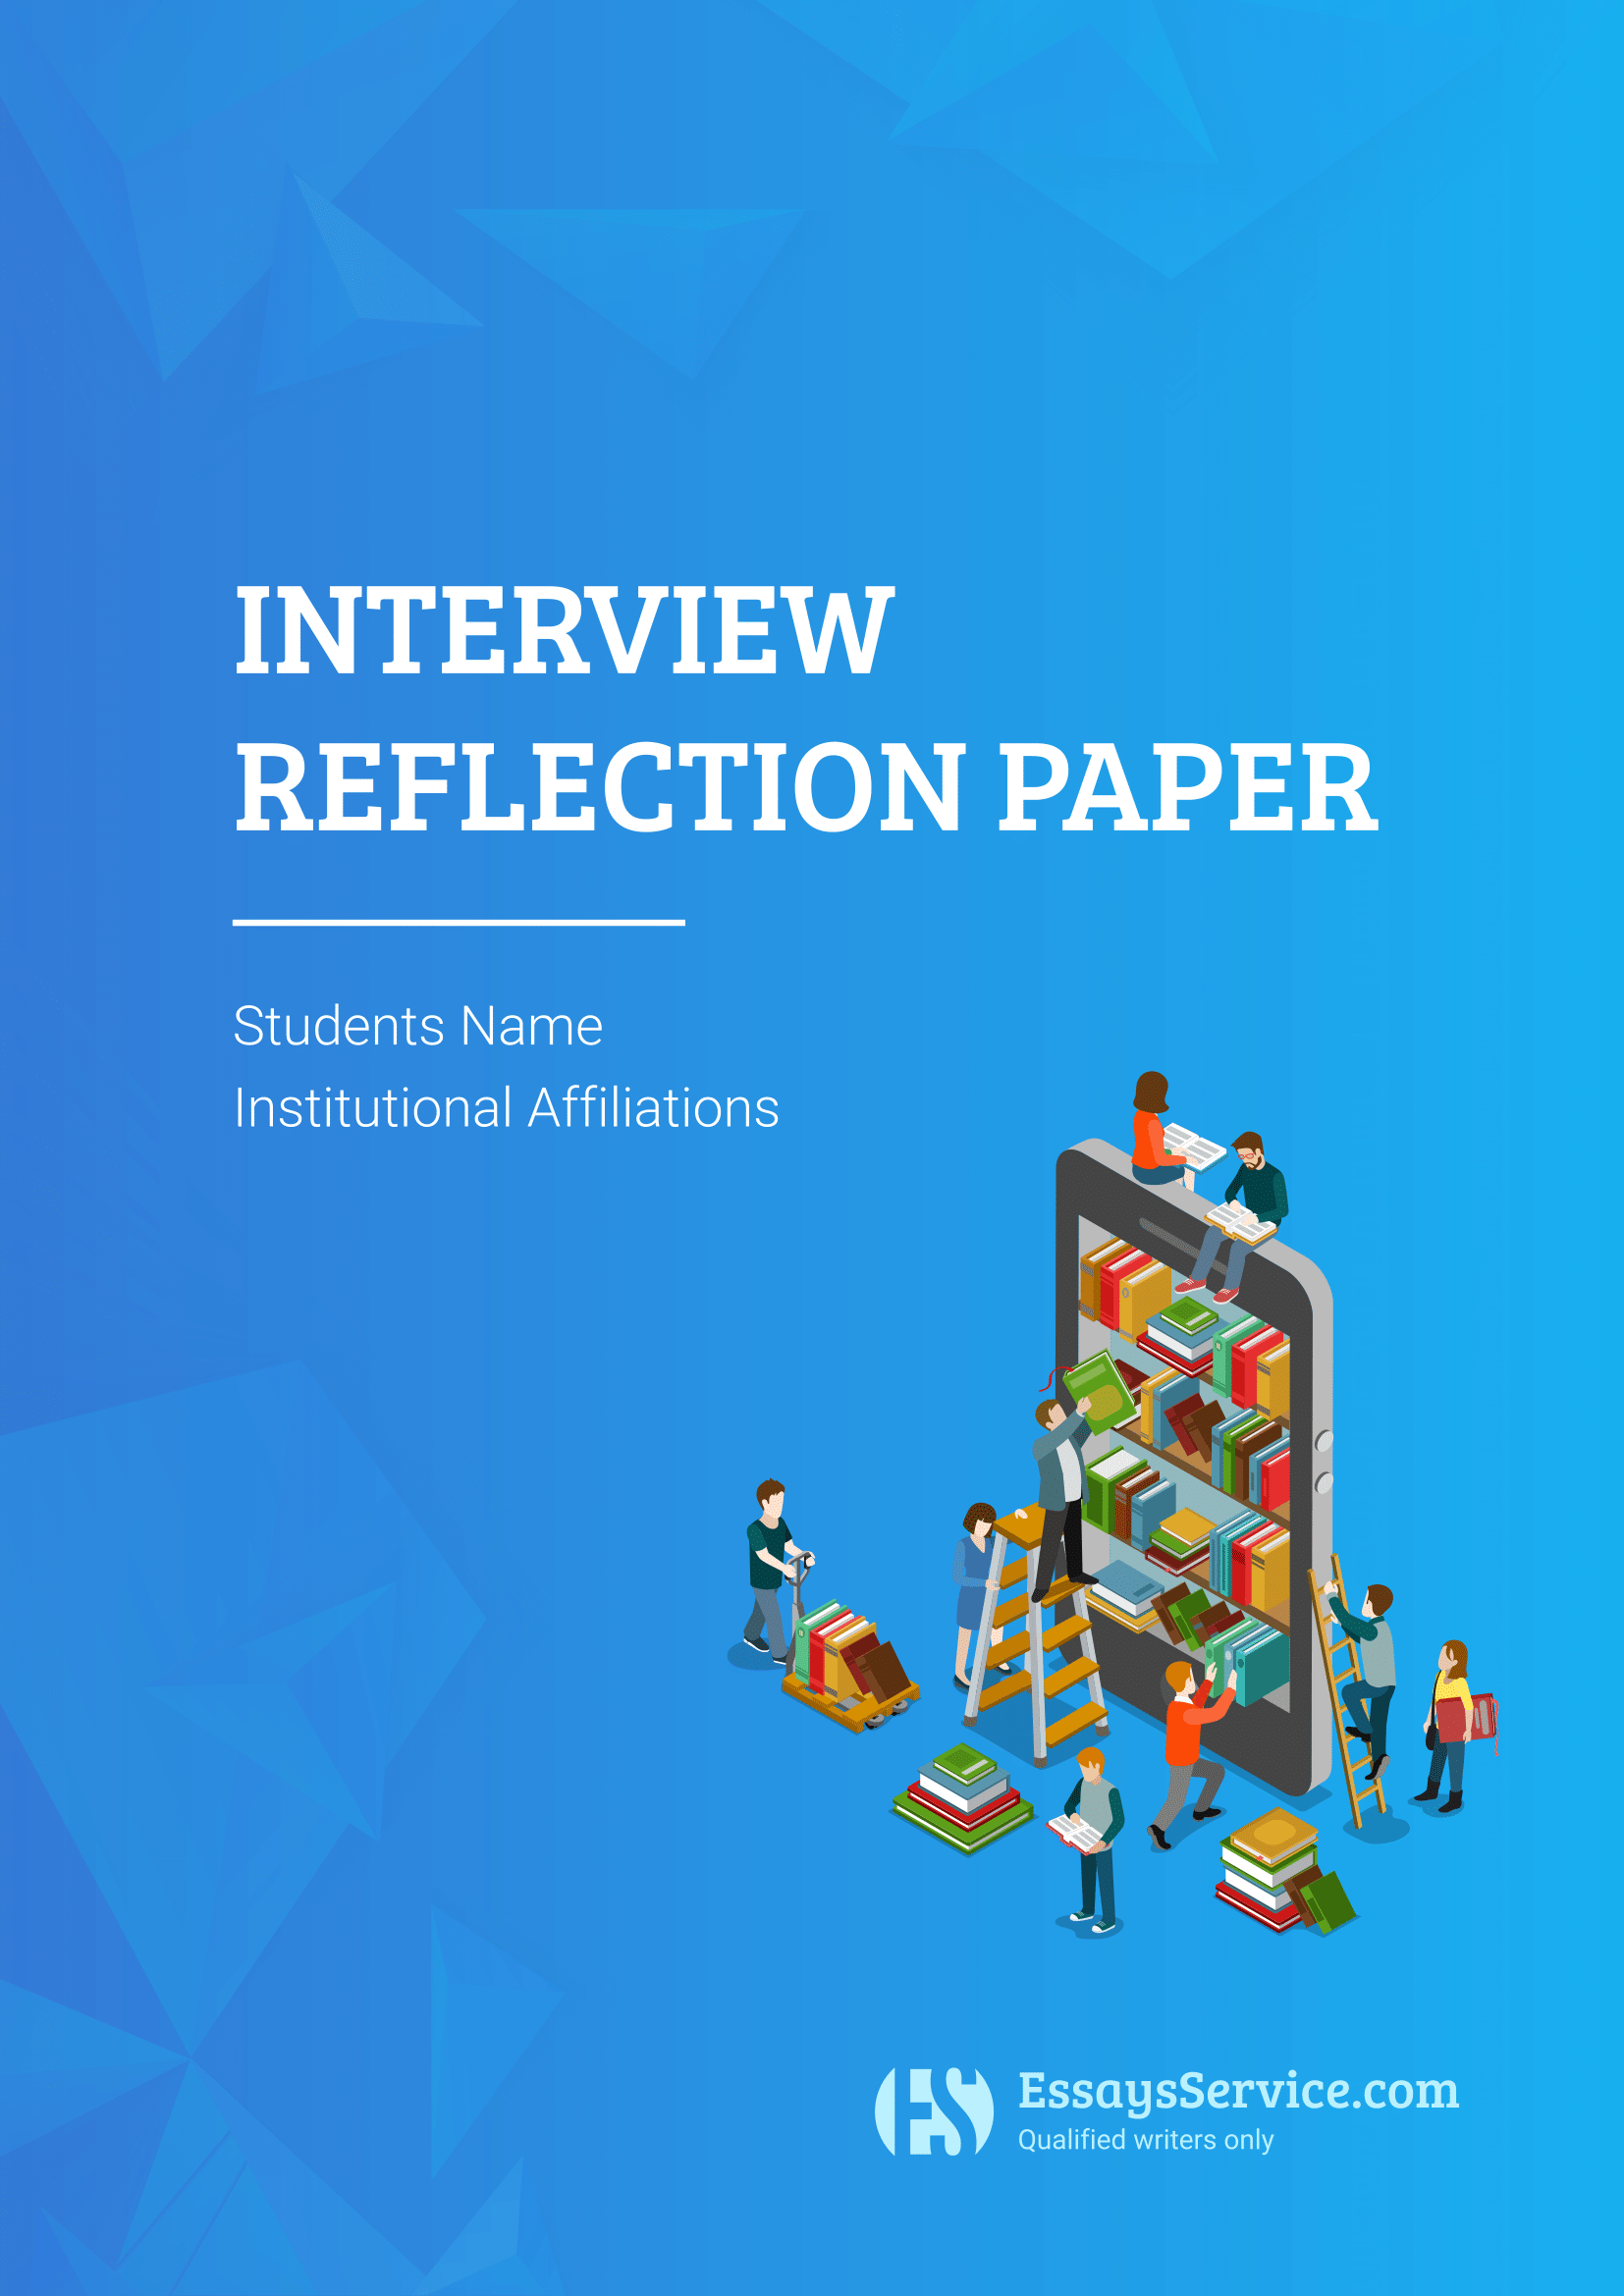 example of interview reflection paper